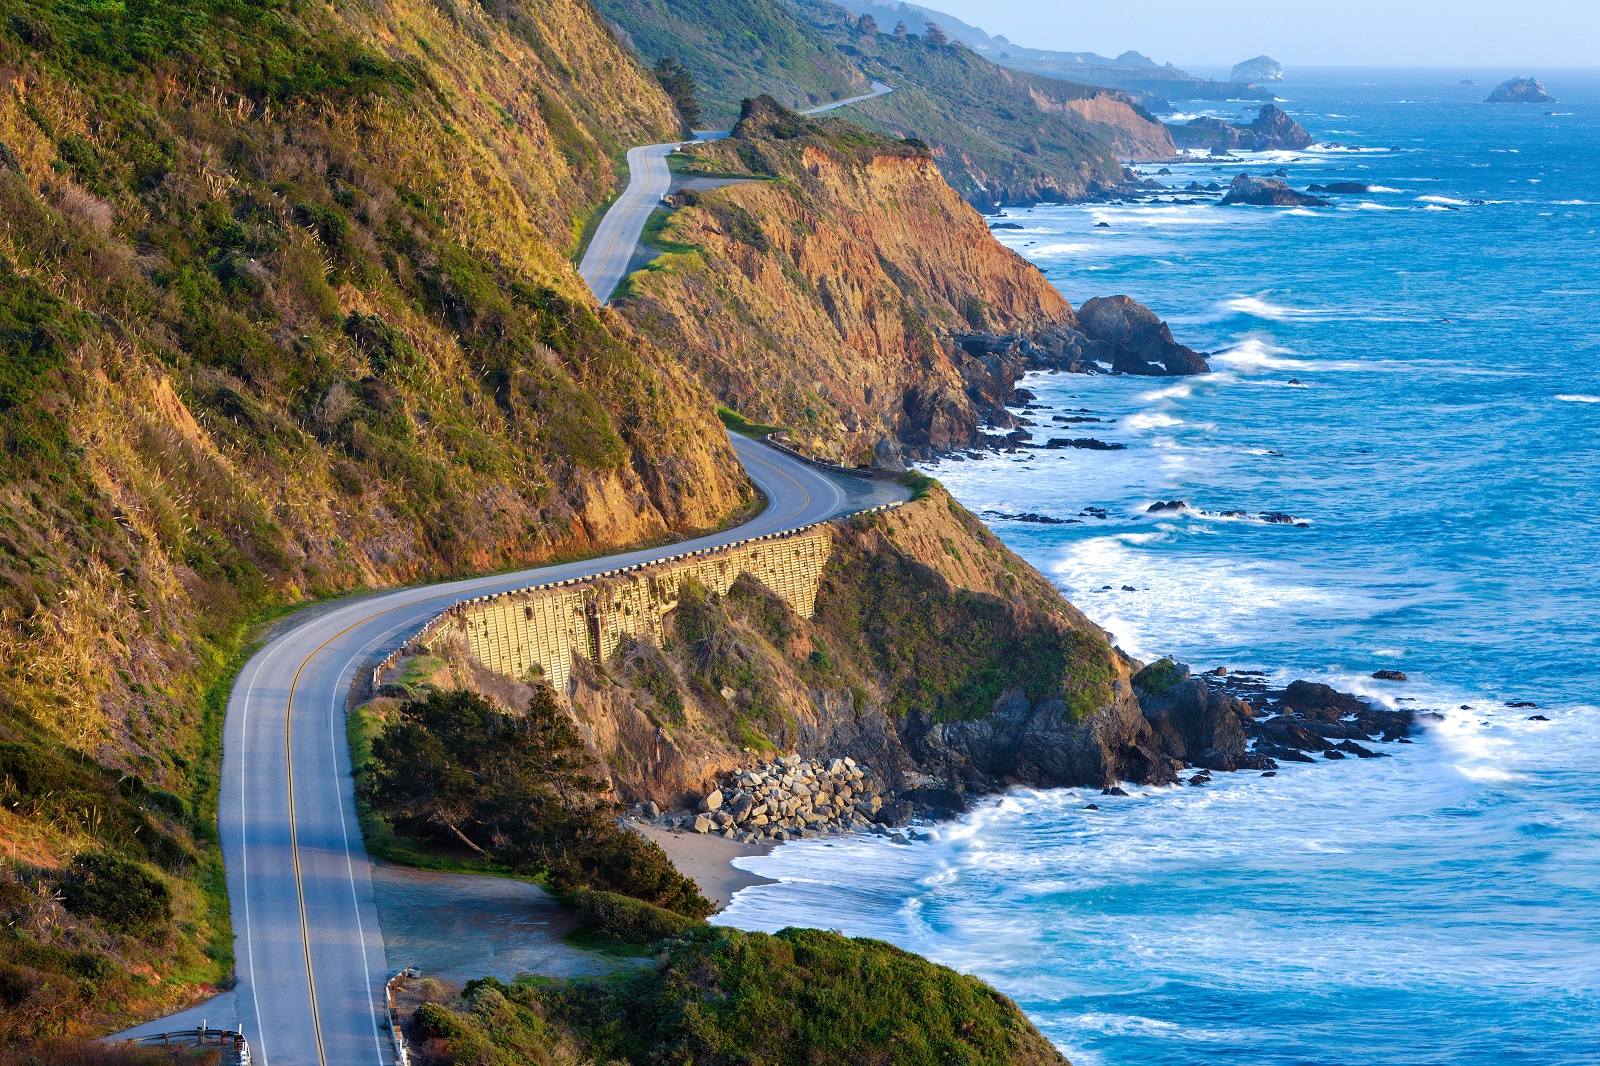 <p class="wp-caption-text">Image Credit: Shutterstock / Doug Meek</p>  <p><span>Indulge in the majesty of California’s coastline as you cruise along Big Sur, where rugged cliffs and towering redwoods create a setting so awe-inspiring it’s like something out of a cinematic masterpiece.</span></p>